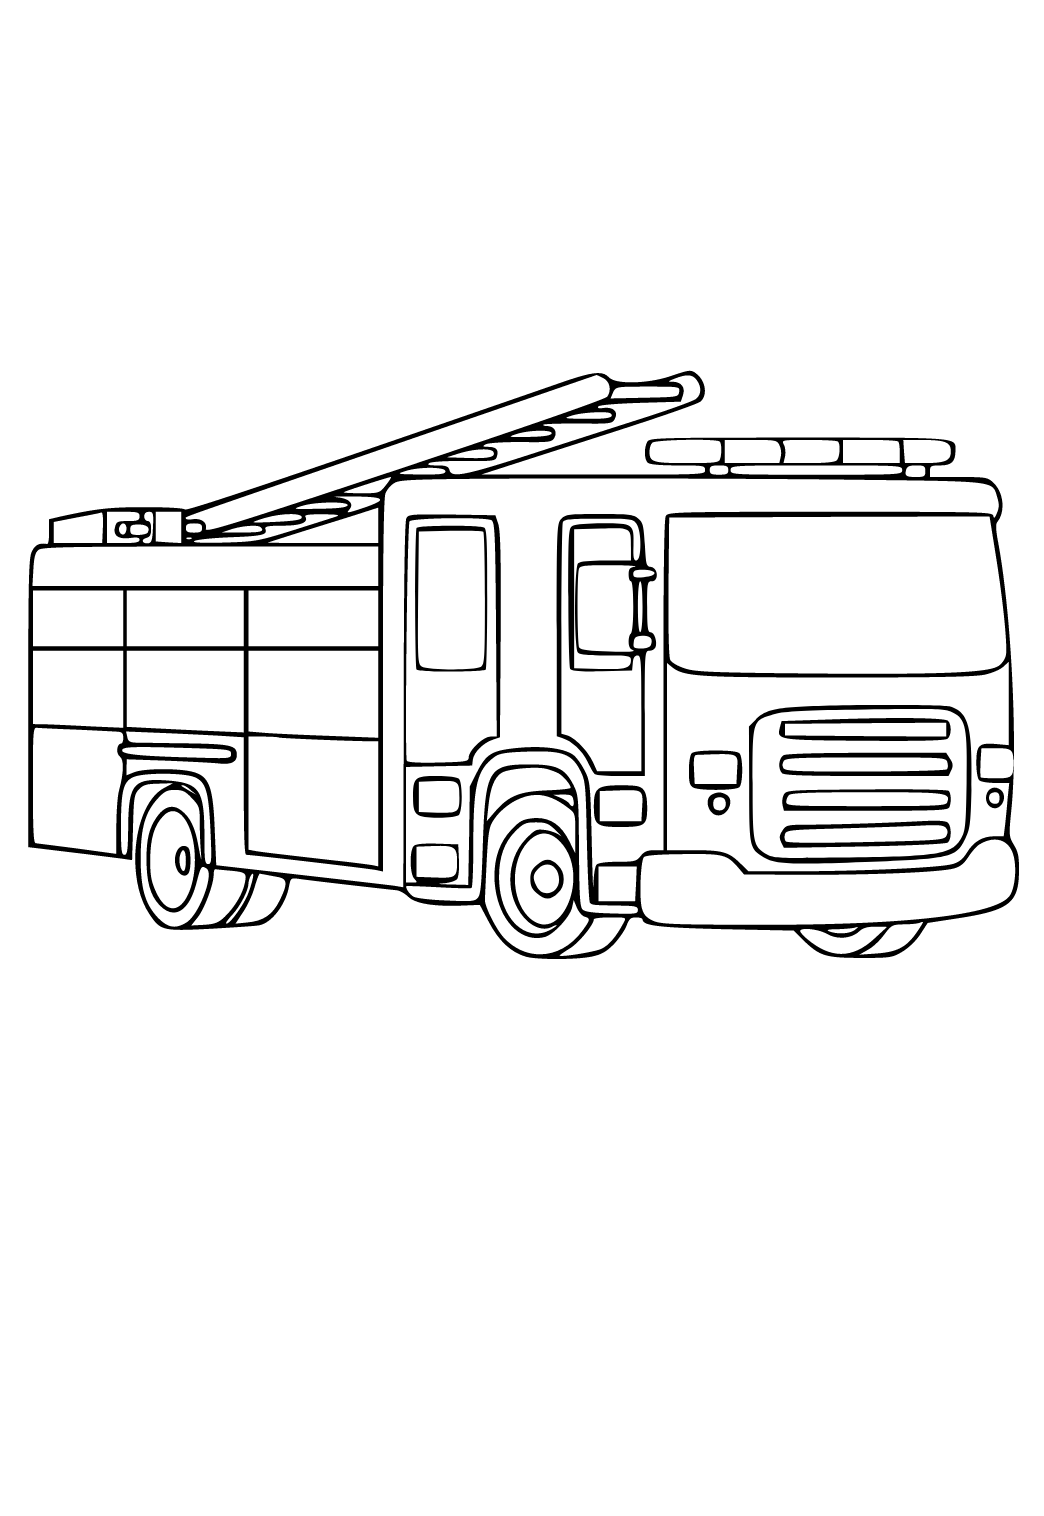 Free printable fire truck real coloring page for adults and kids